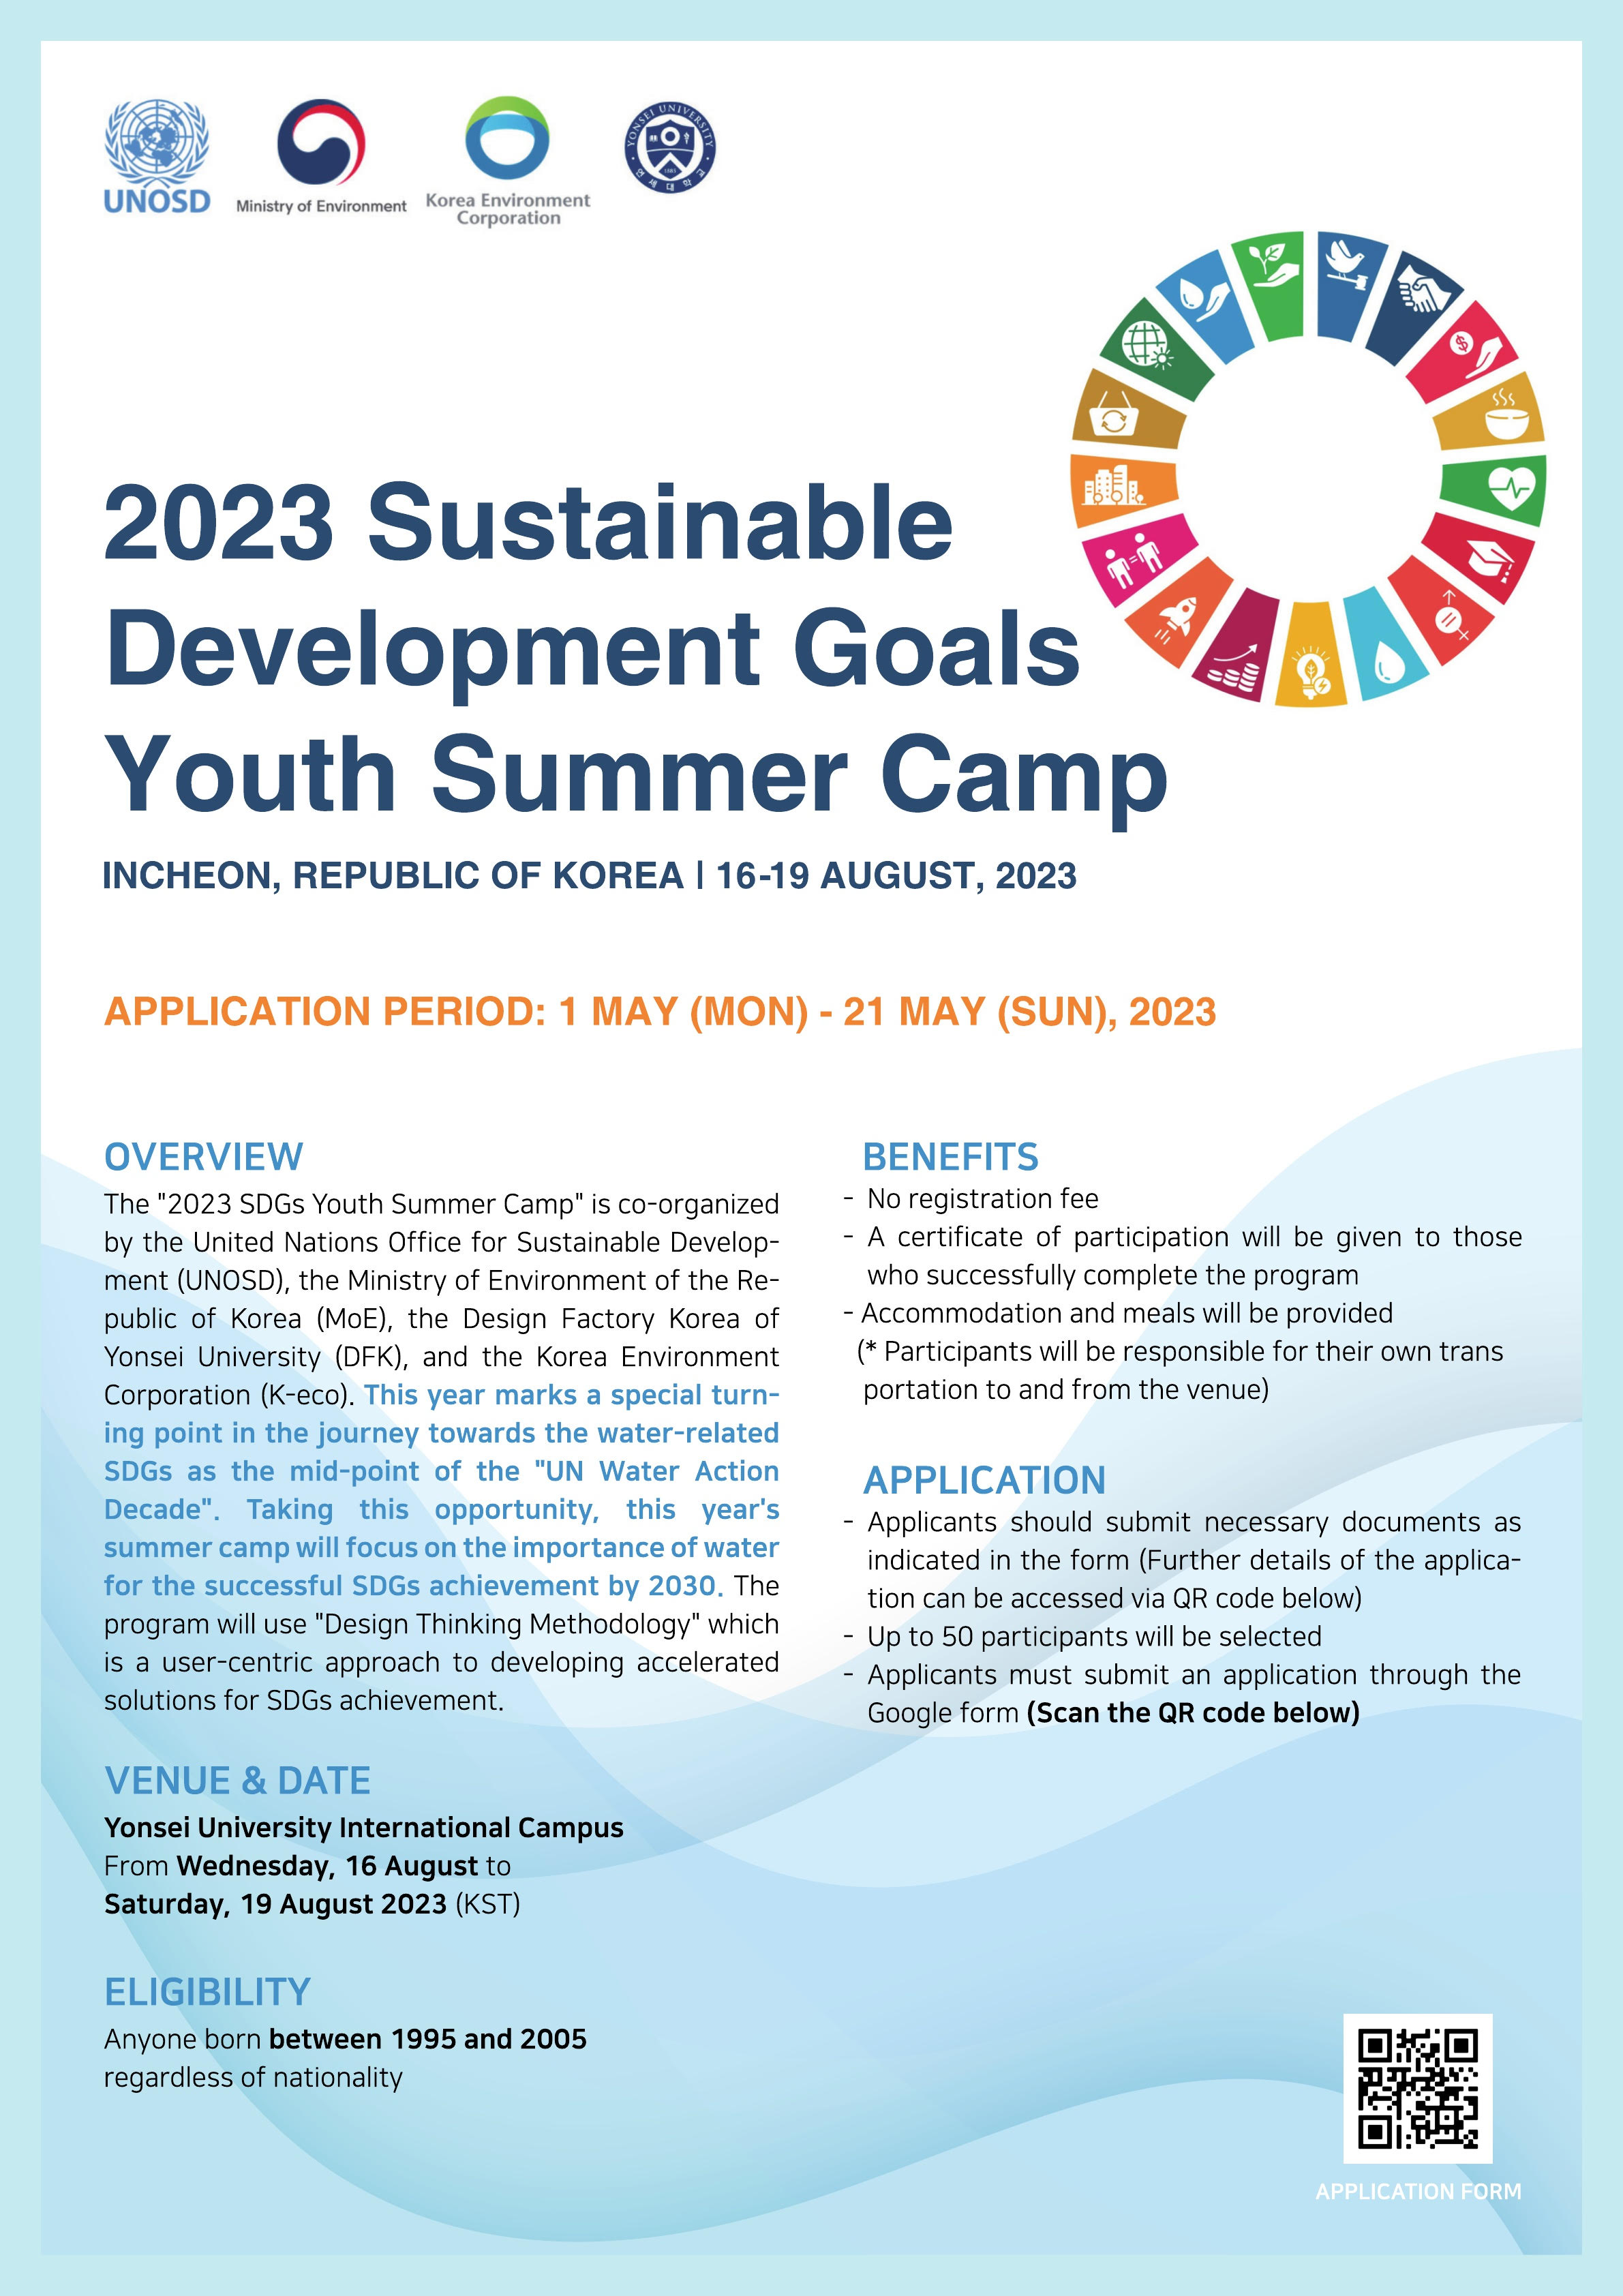 UNOSD, Ministry of Environment, Korea Environment Corporation, 연세대학교. 2023 Sustainable Development Goals Youth Summer Camp INCHEON, REPUBLIC OF KOREA | 16-19 AUGUST, 2023 APPLICATION PERIOD: 1 MAY (MON) - 21 MAY (SUN), 2023 / OVERVIEW: The “2023 SDGs Youth Summer Camp” is co-organized by the United Nations Office for Sustainable Develop-ment(UNOSD), the Ministry of Environment of the Re-public of Korea(MoE), the Design Factory Korea of Yousei University(DFK), and the Korea Environment Corporation(K-eco). This year marks a special turn-ing point in the journey towards the water-related SDGs as the mid-point of the “UN Water Action Decade”. Taking this opportunity, this year's summer camp will focus on the importance of water for the successful SDGs achievement by 2030. The program will use “Design Thinking Methodology” which is a user-centric approach to developing accelereted solutions for SDGs achievement. VENUE&DATE Yonsei University International Campus From Wednesday, 16 August to Saturday, 19 August 2023(KST). ELIGIBILITY Anyone born between 1995 and 2005 regerdless of nationality. BENEFITS -No registration fee. -A certificate of participation will be given to those who successfully complete the program. -Accommodation and meals will be provided(*Participants will be responsible for their own trans portation to and from the venue). APPLICATION -Applicants should submit necessary documents as indicated in the form (Further details of the applica-tion can be accessed via QR code below) -Up to 50 participants will be selected. -Applicants must submit an application through the Google form(Scan the QR code below) QR(https://qrco.de/bdvO7I) APPLICATION FORM